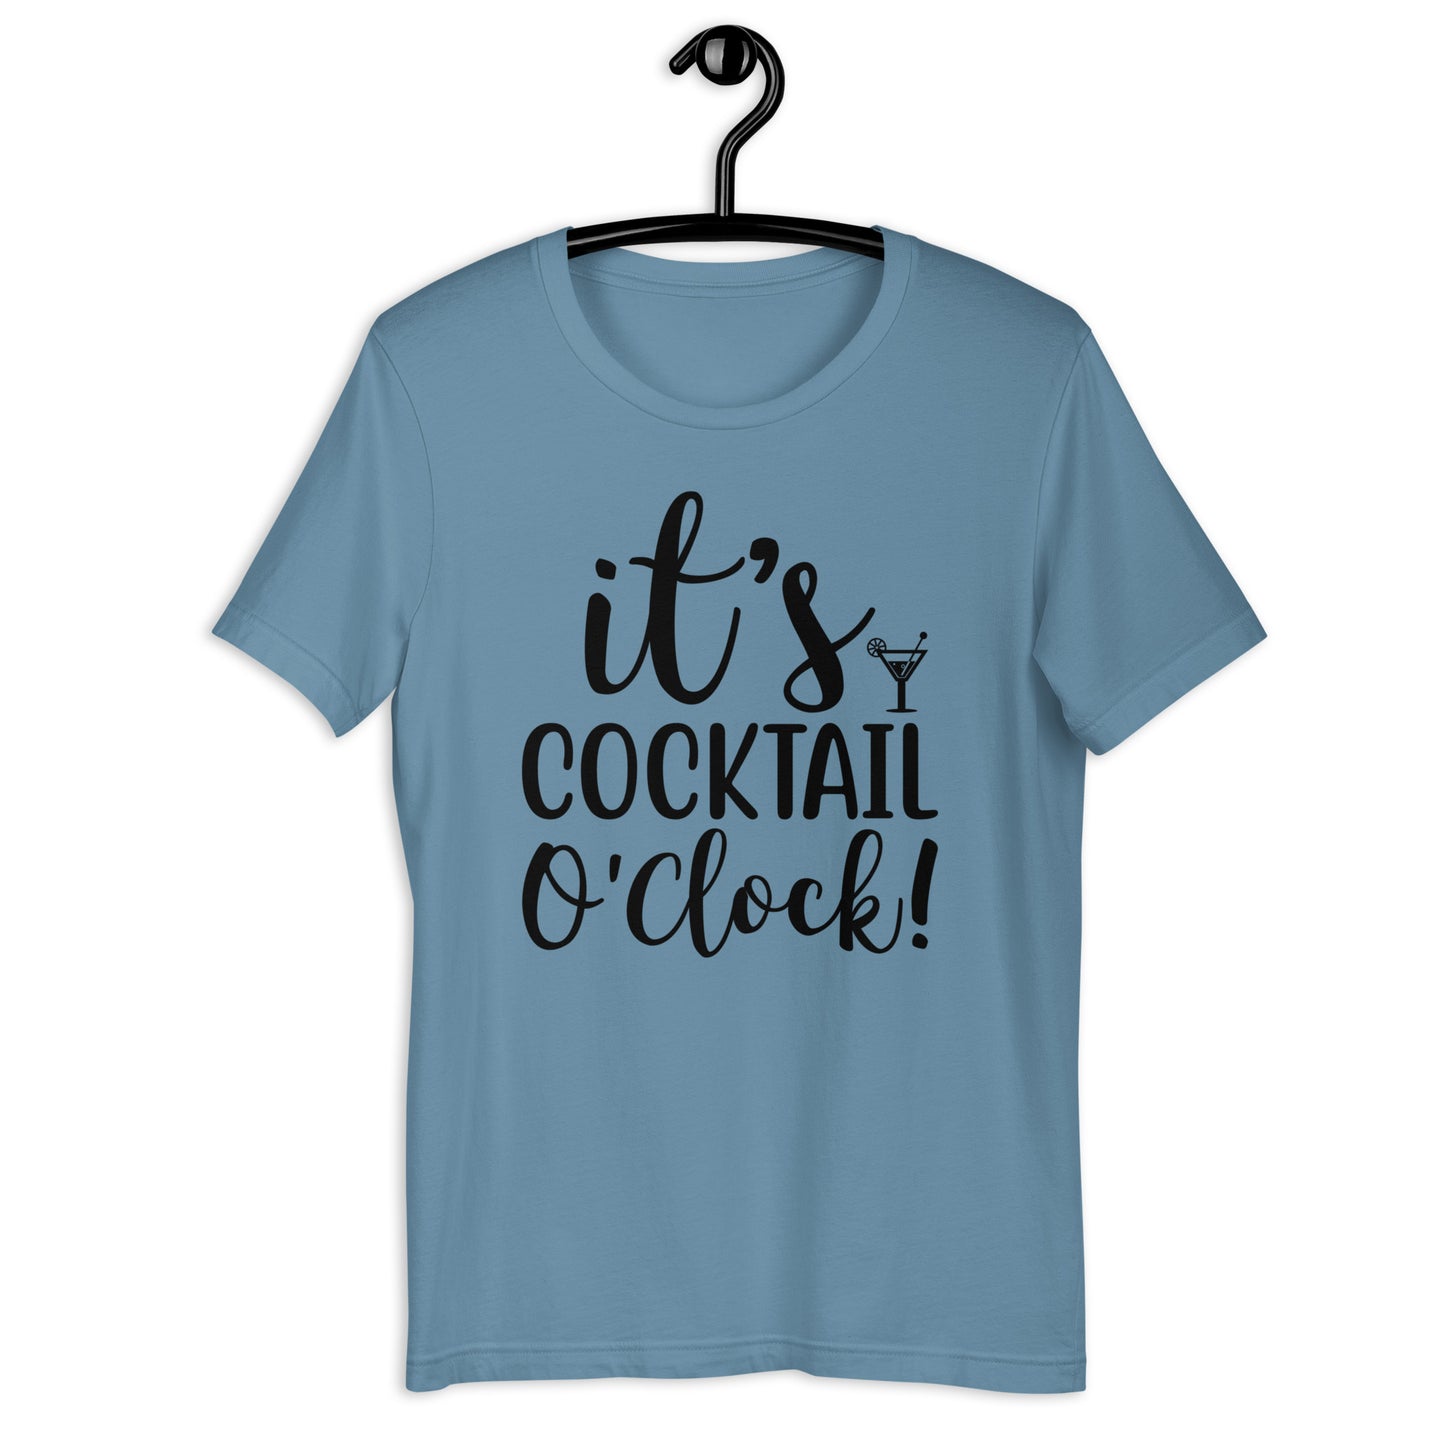 Time to Unwind: It's Cocktail O'Clock Tee